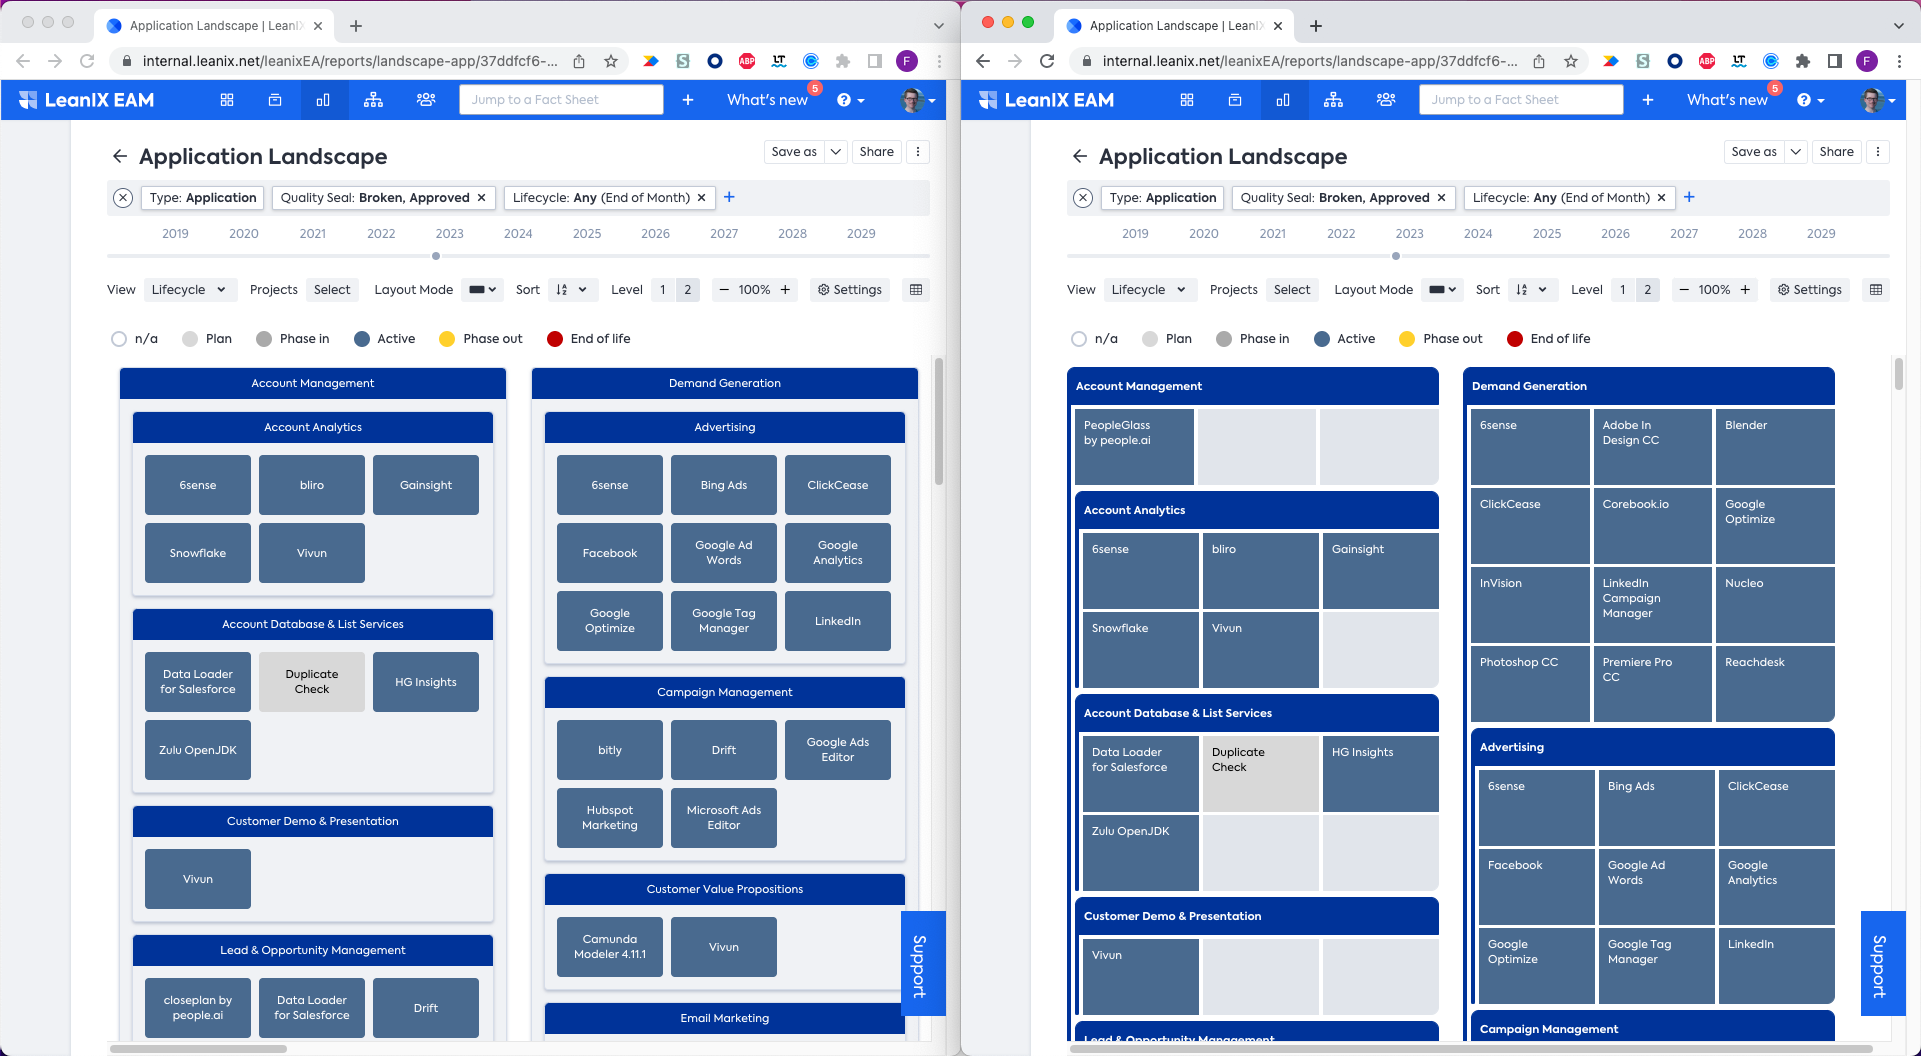 Old layout on the left, new layout on the right – leaving more space for additional attributes, less “white space” and a clearer view on the hierarchies in the clustering Fact Sheet type.